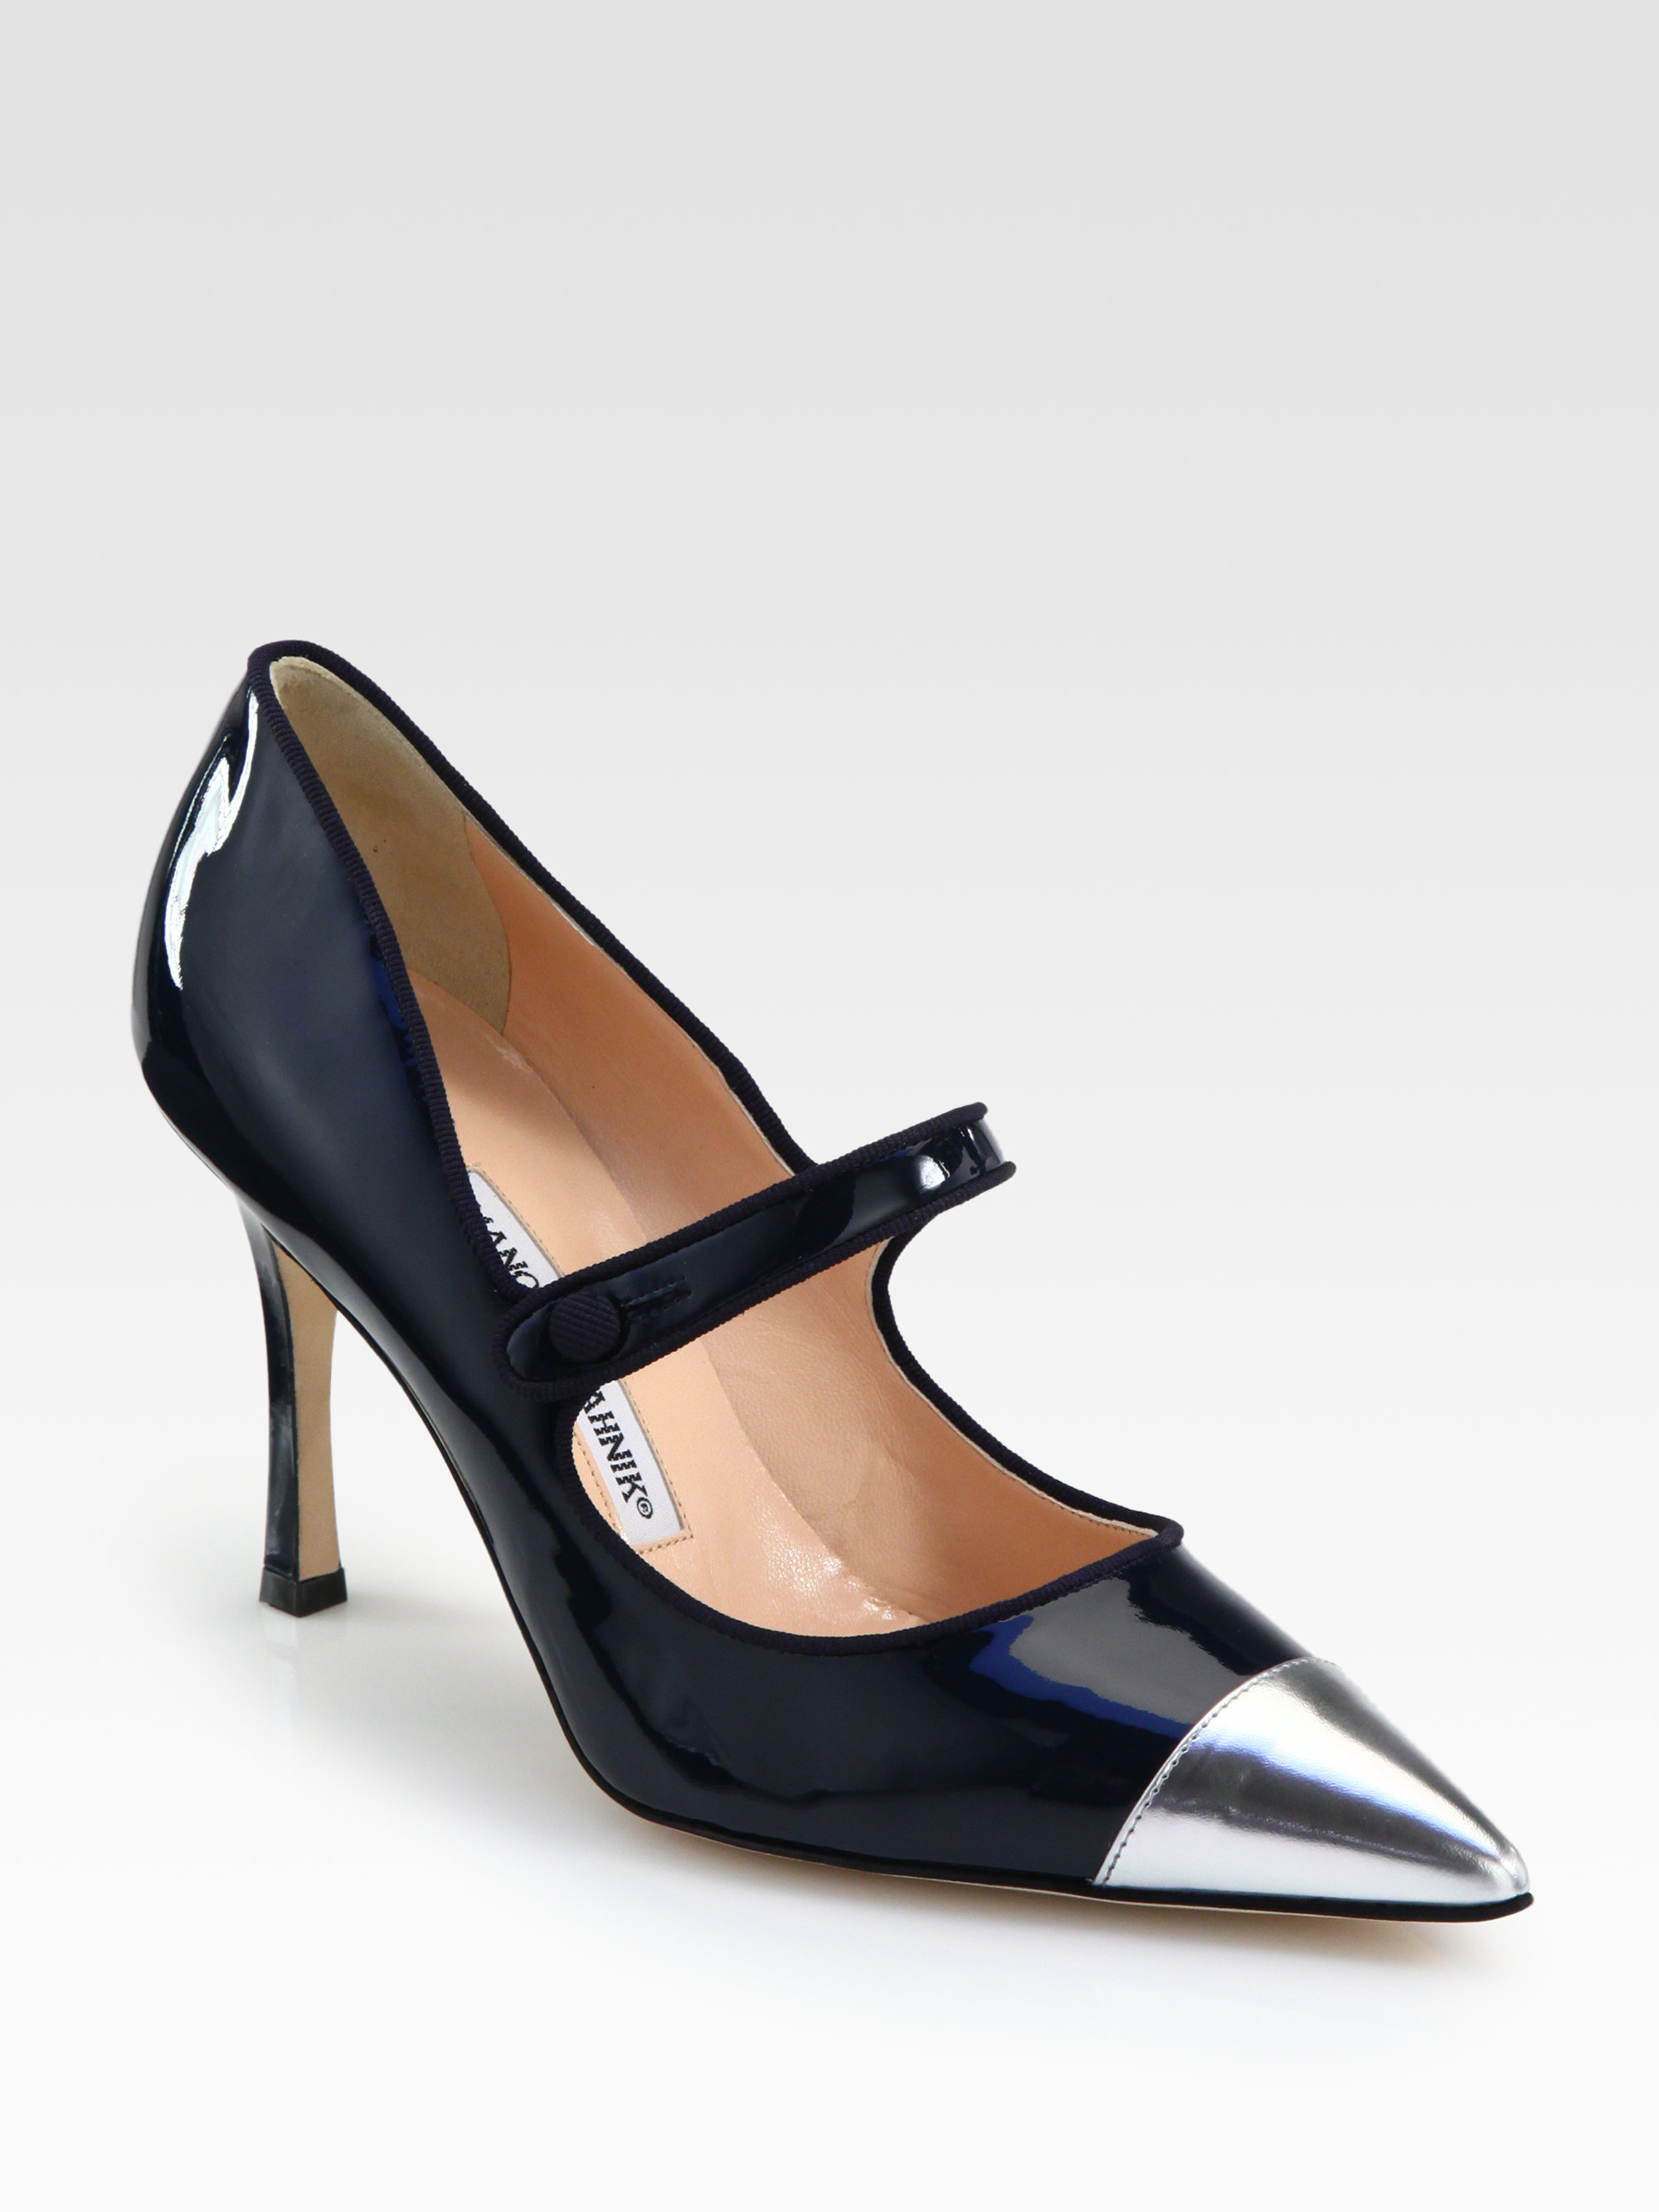 Manolo Blahnik Campari Leather Patent Mary Jane Pumps in Blue (navy) | Lyst